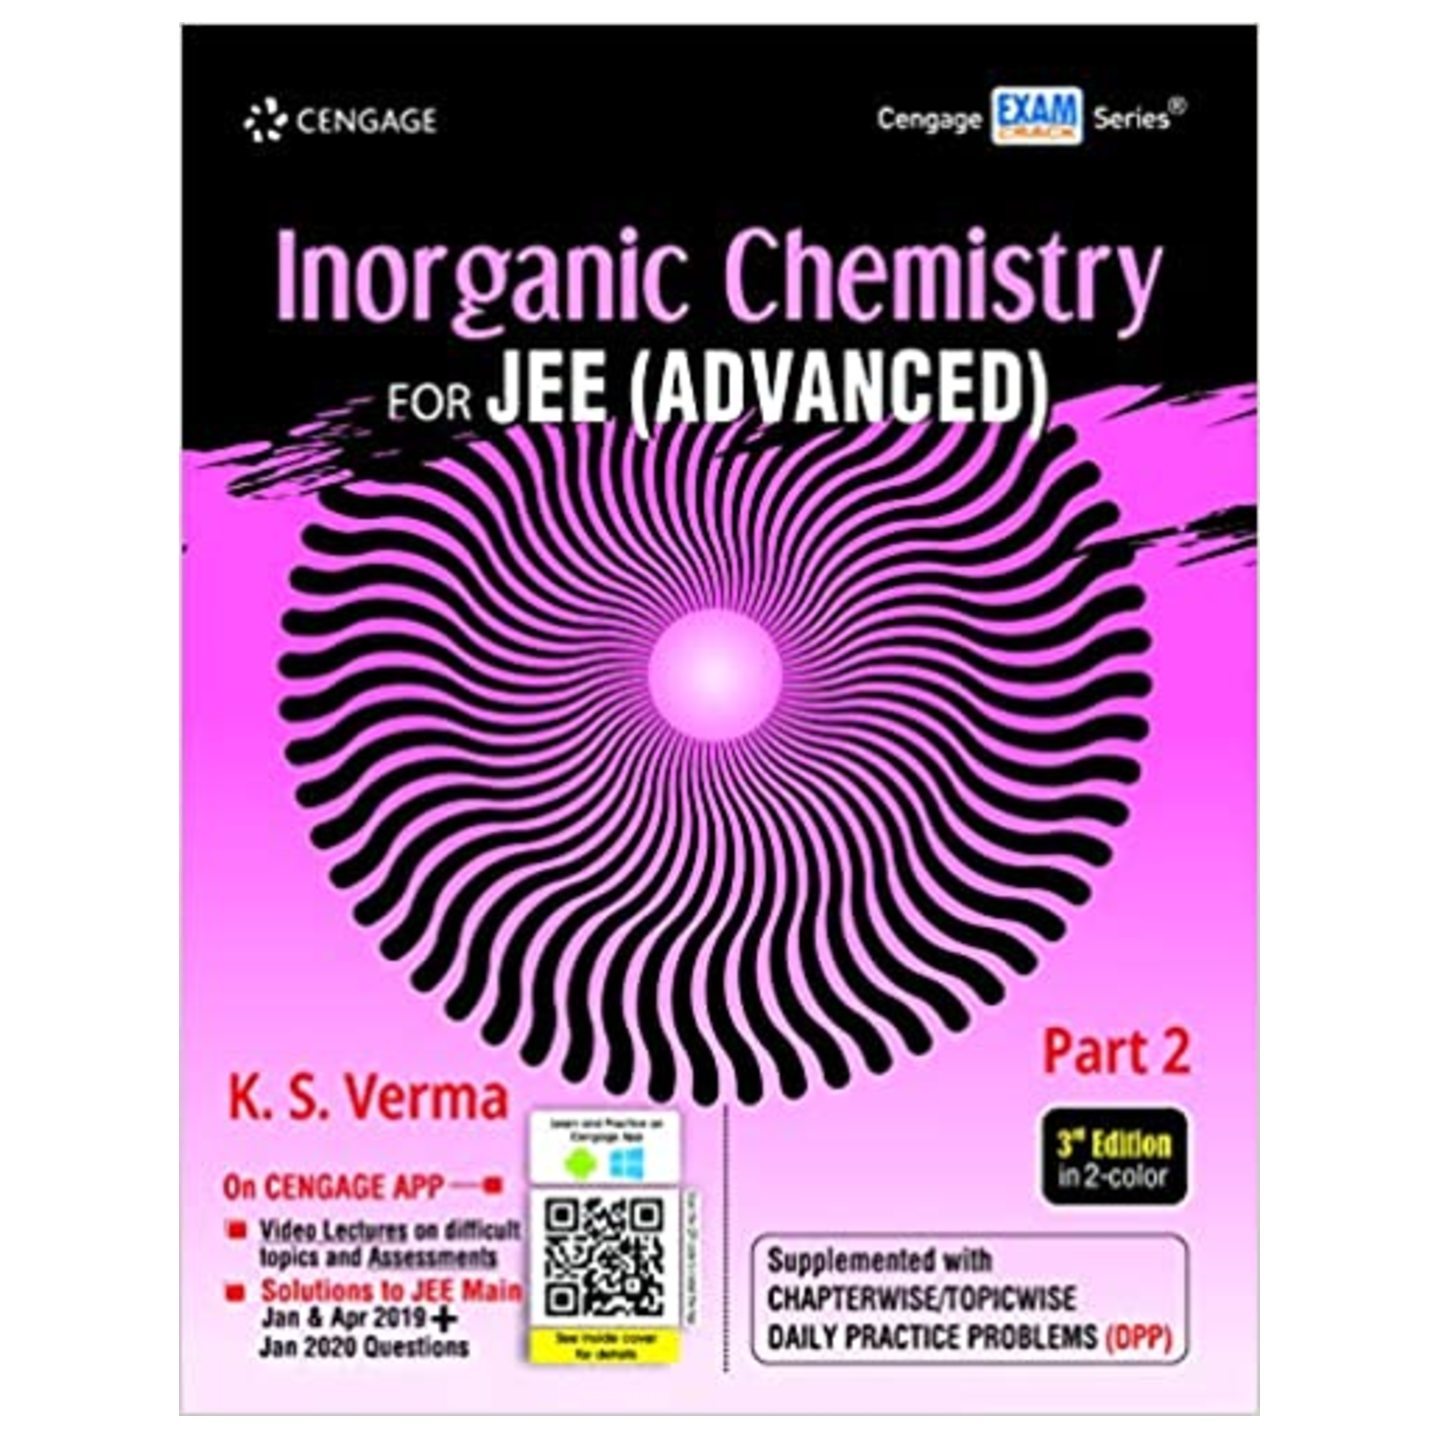 Inorganic Chemistry for JEE Advanced Part 2